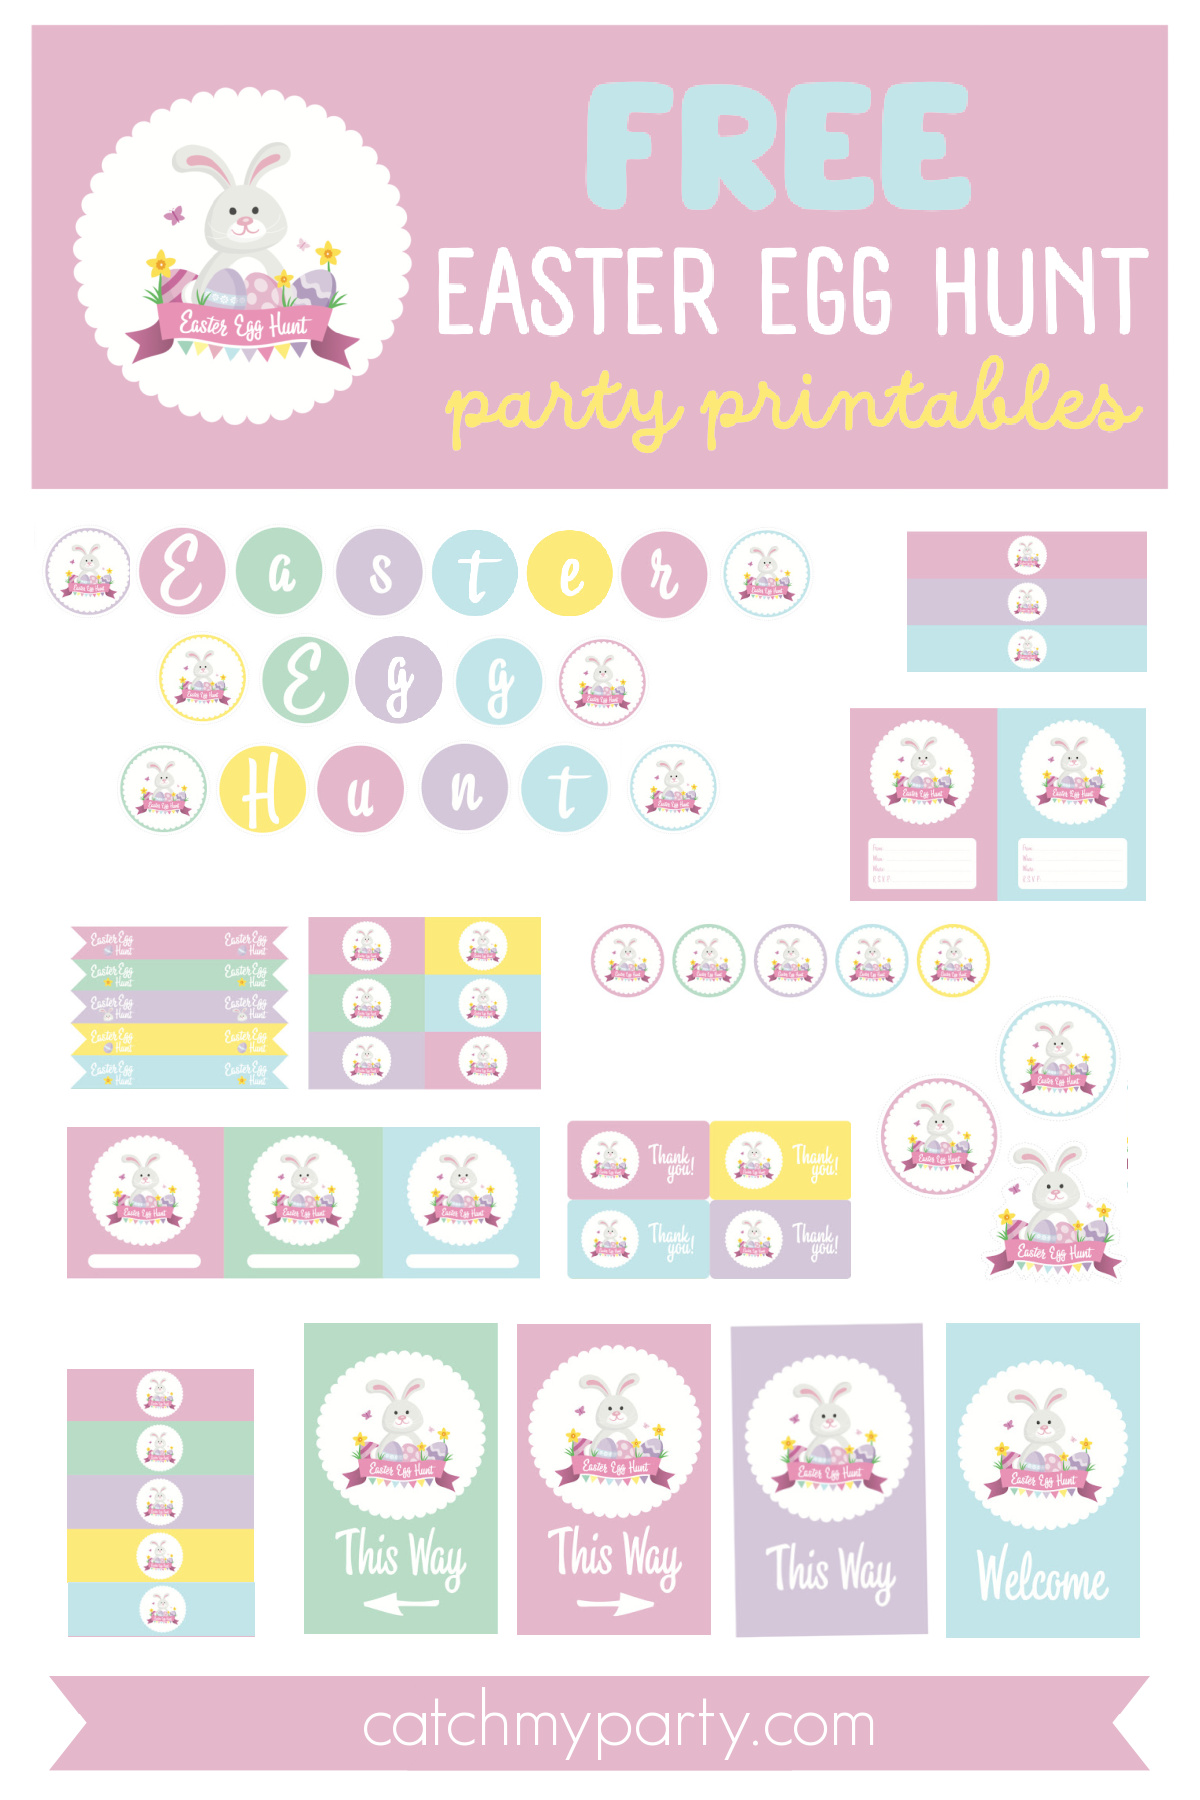 Download these FREE Easter Egg Hunt Printables Now!